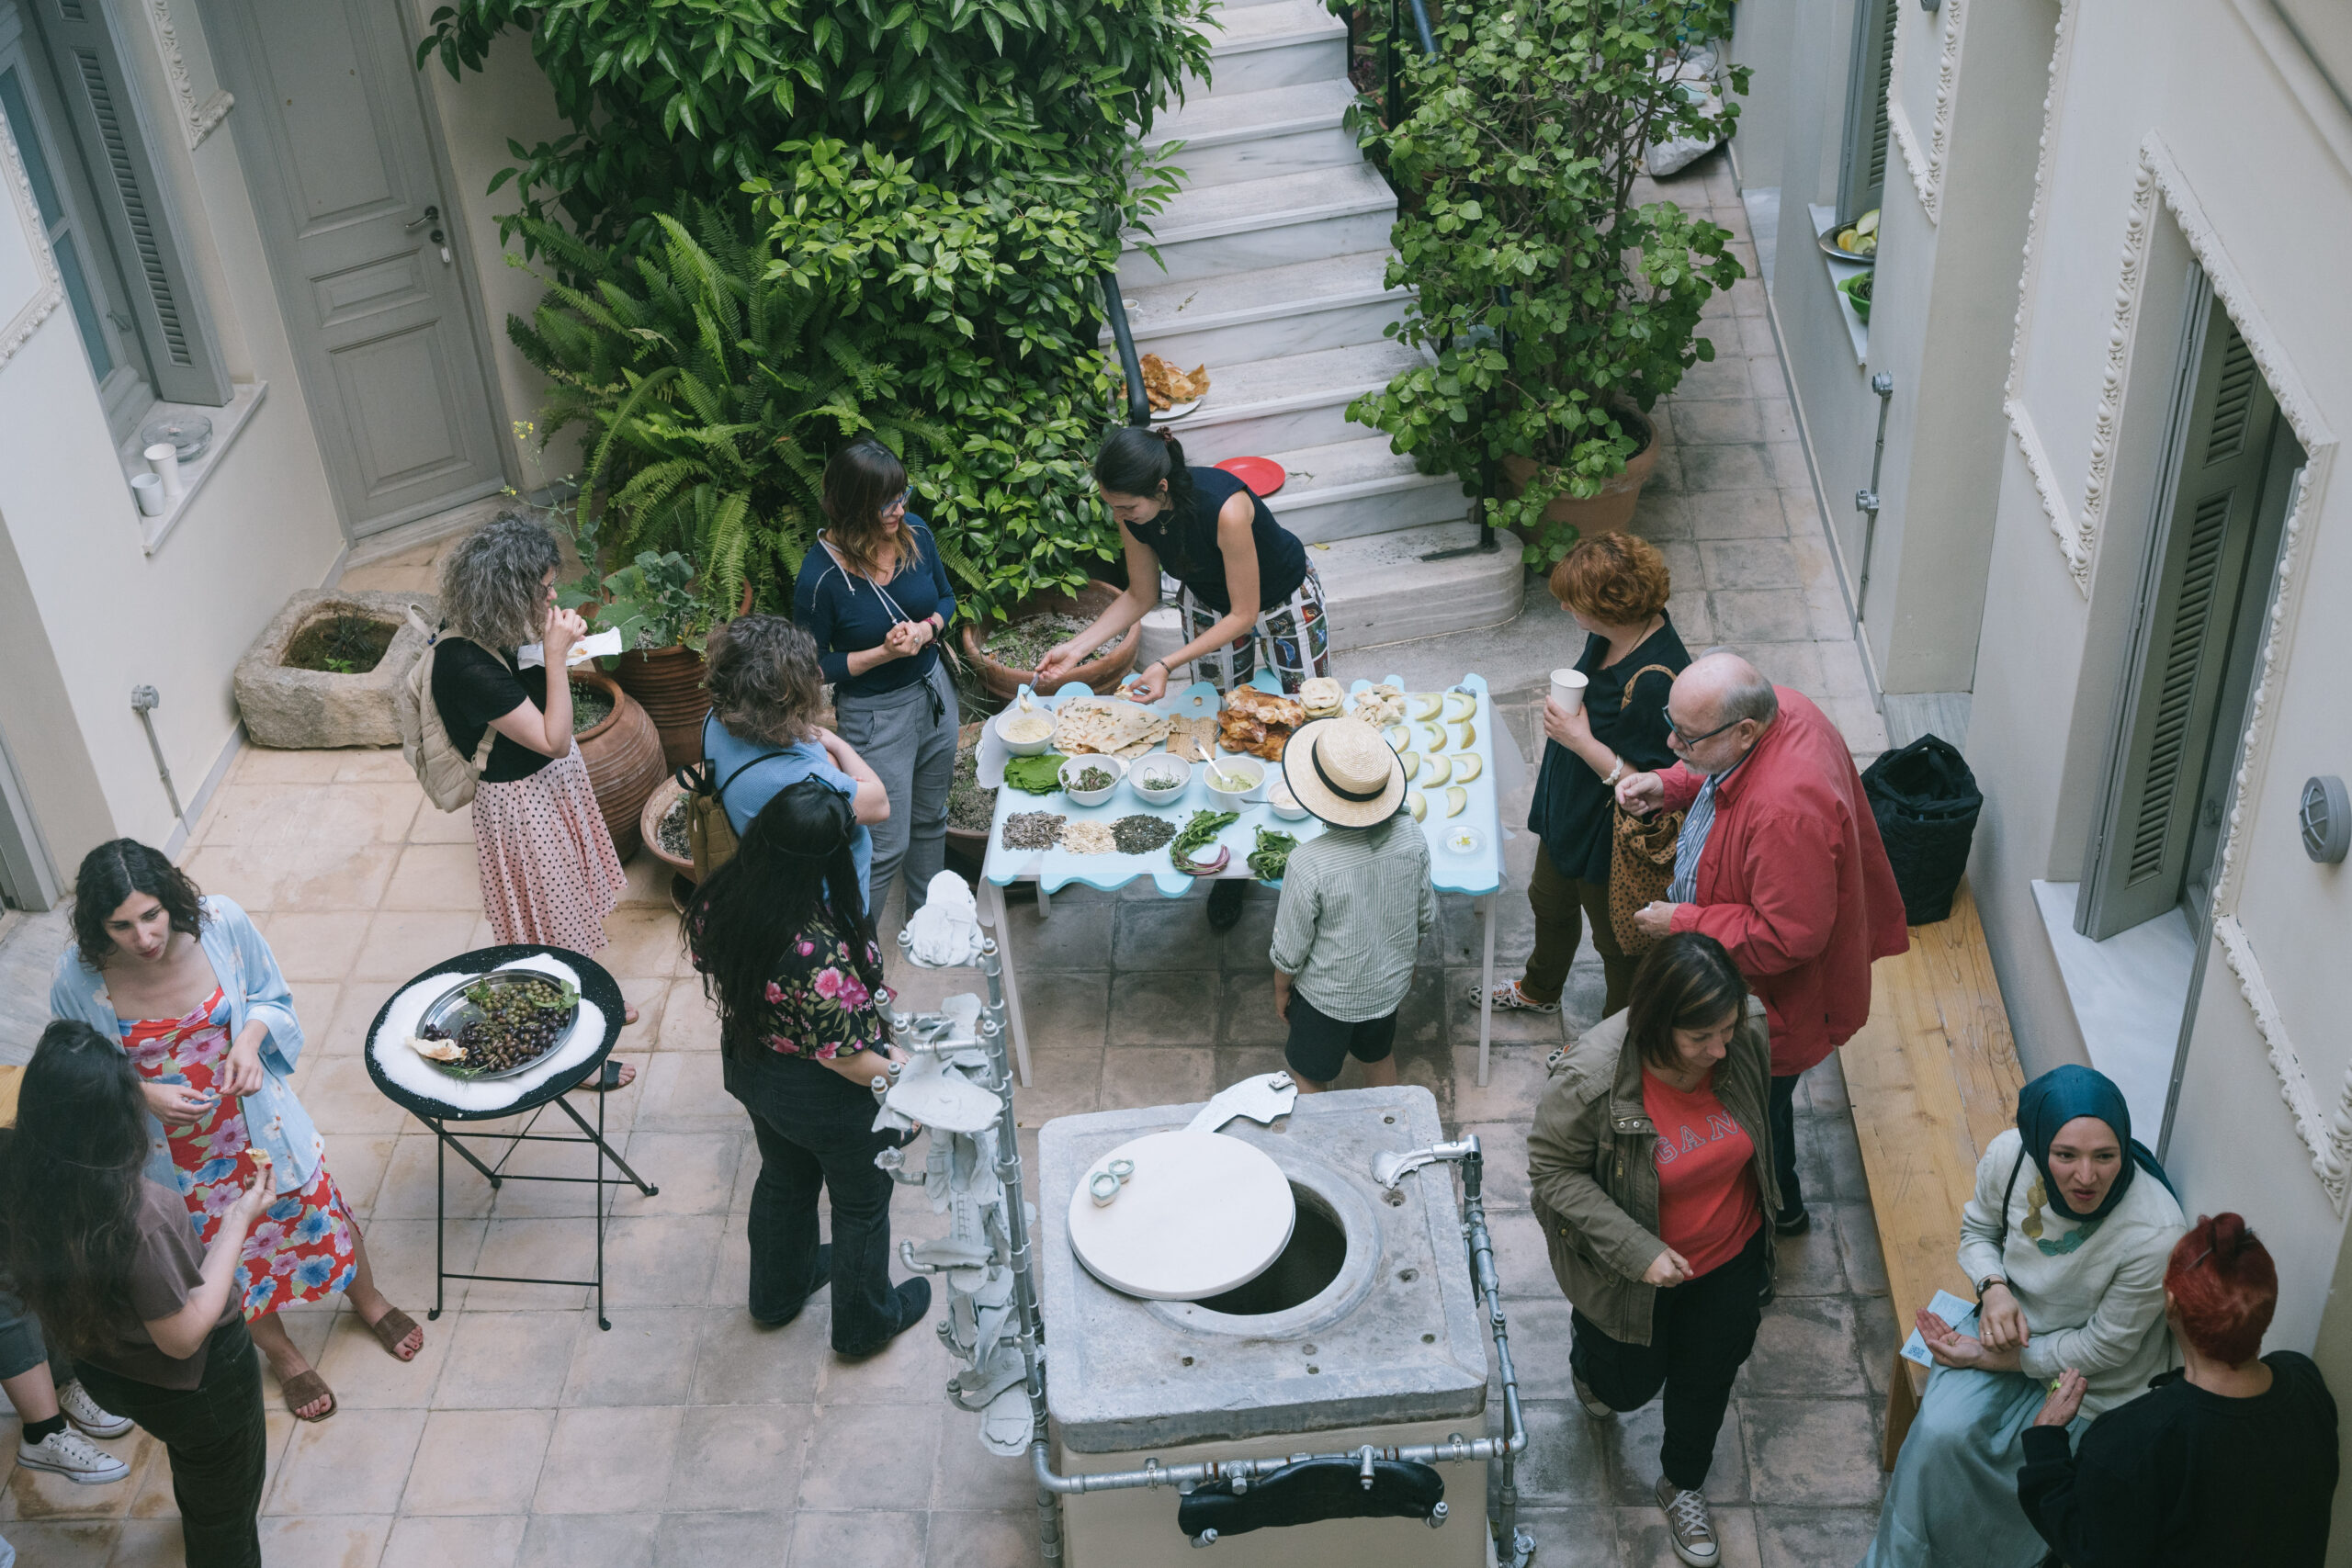 A gathering of people surround a table laden with food in a courtyard.